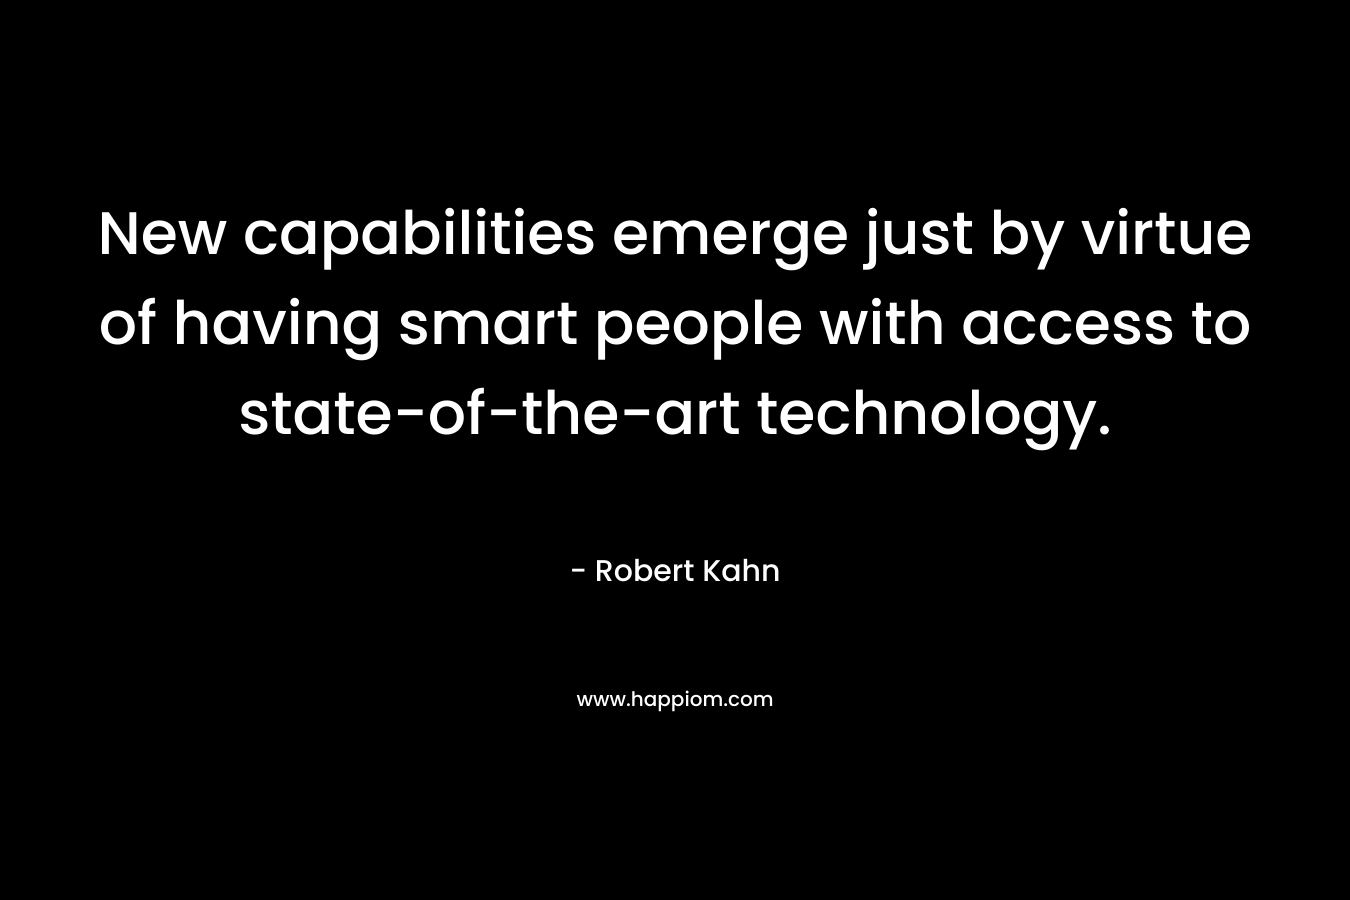 New capabilities emerge just by virtue of having smart people with access to state-of-the-art technology. – Robert Kahn